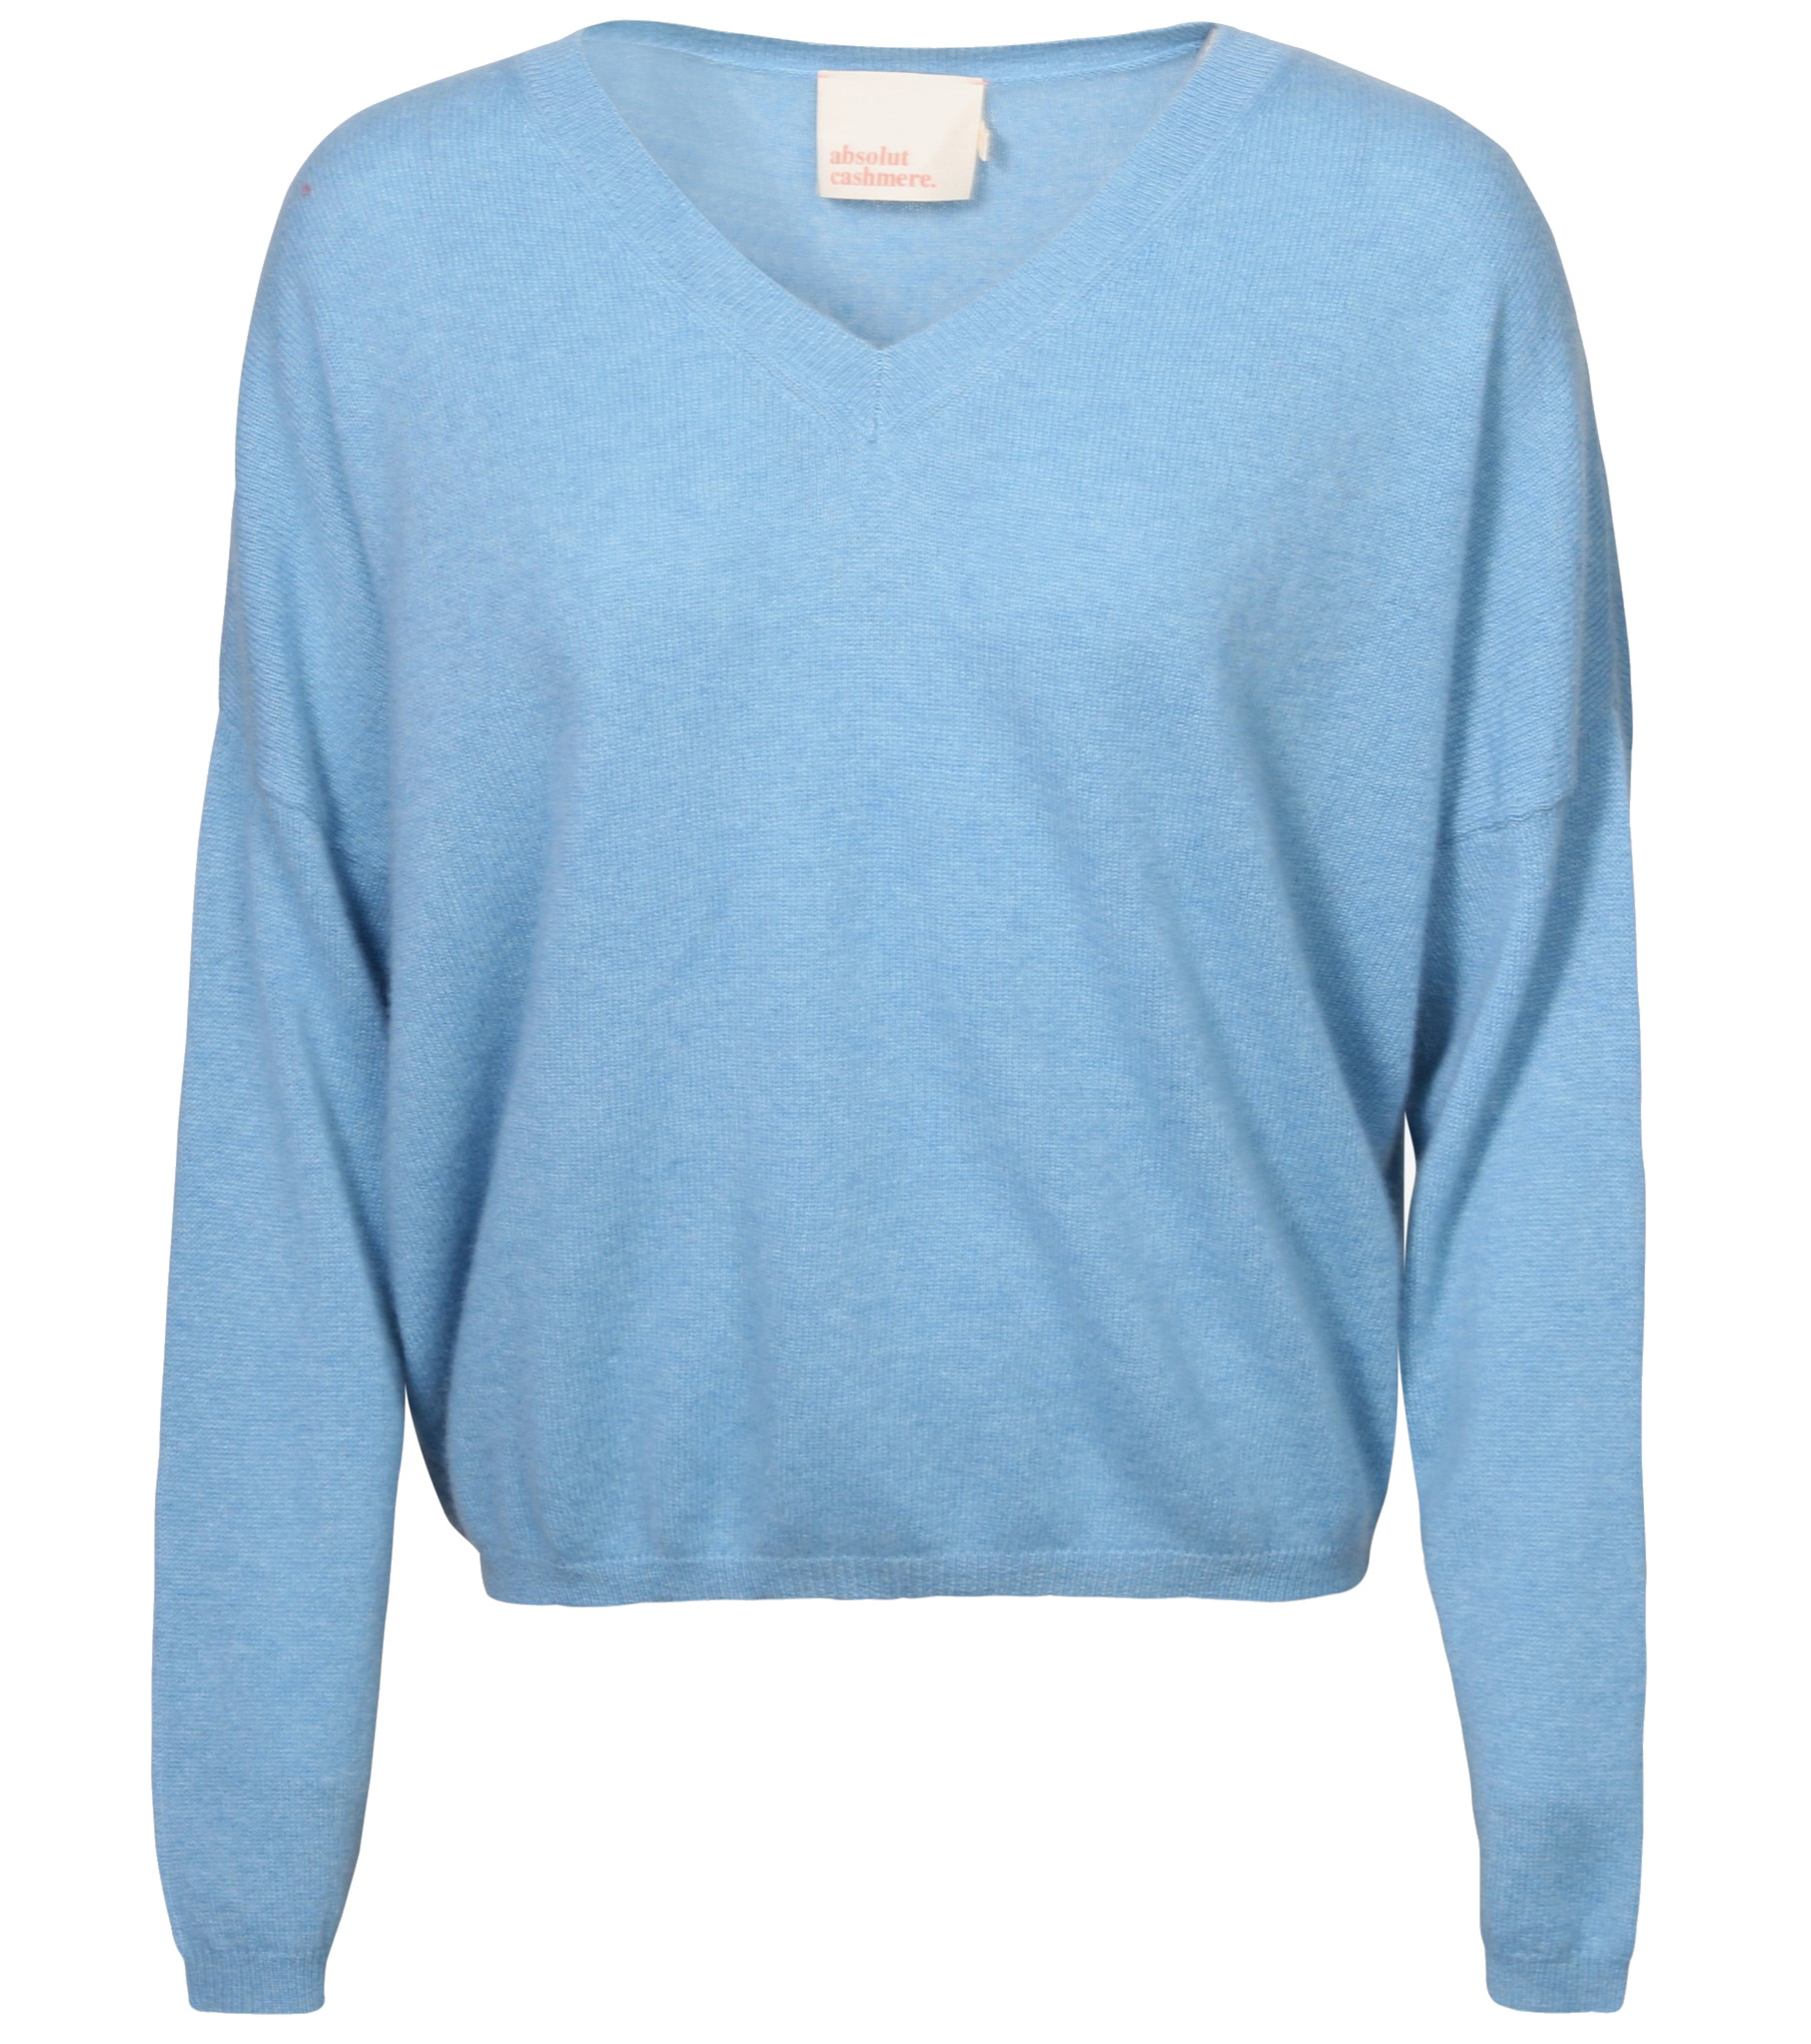 ABSOLUT CASHMERE V-Neck Sweater Alicia in Blue